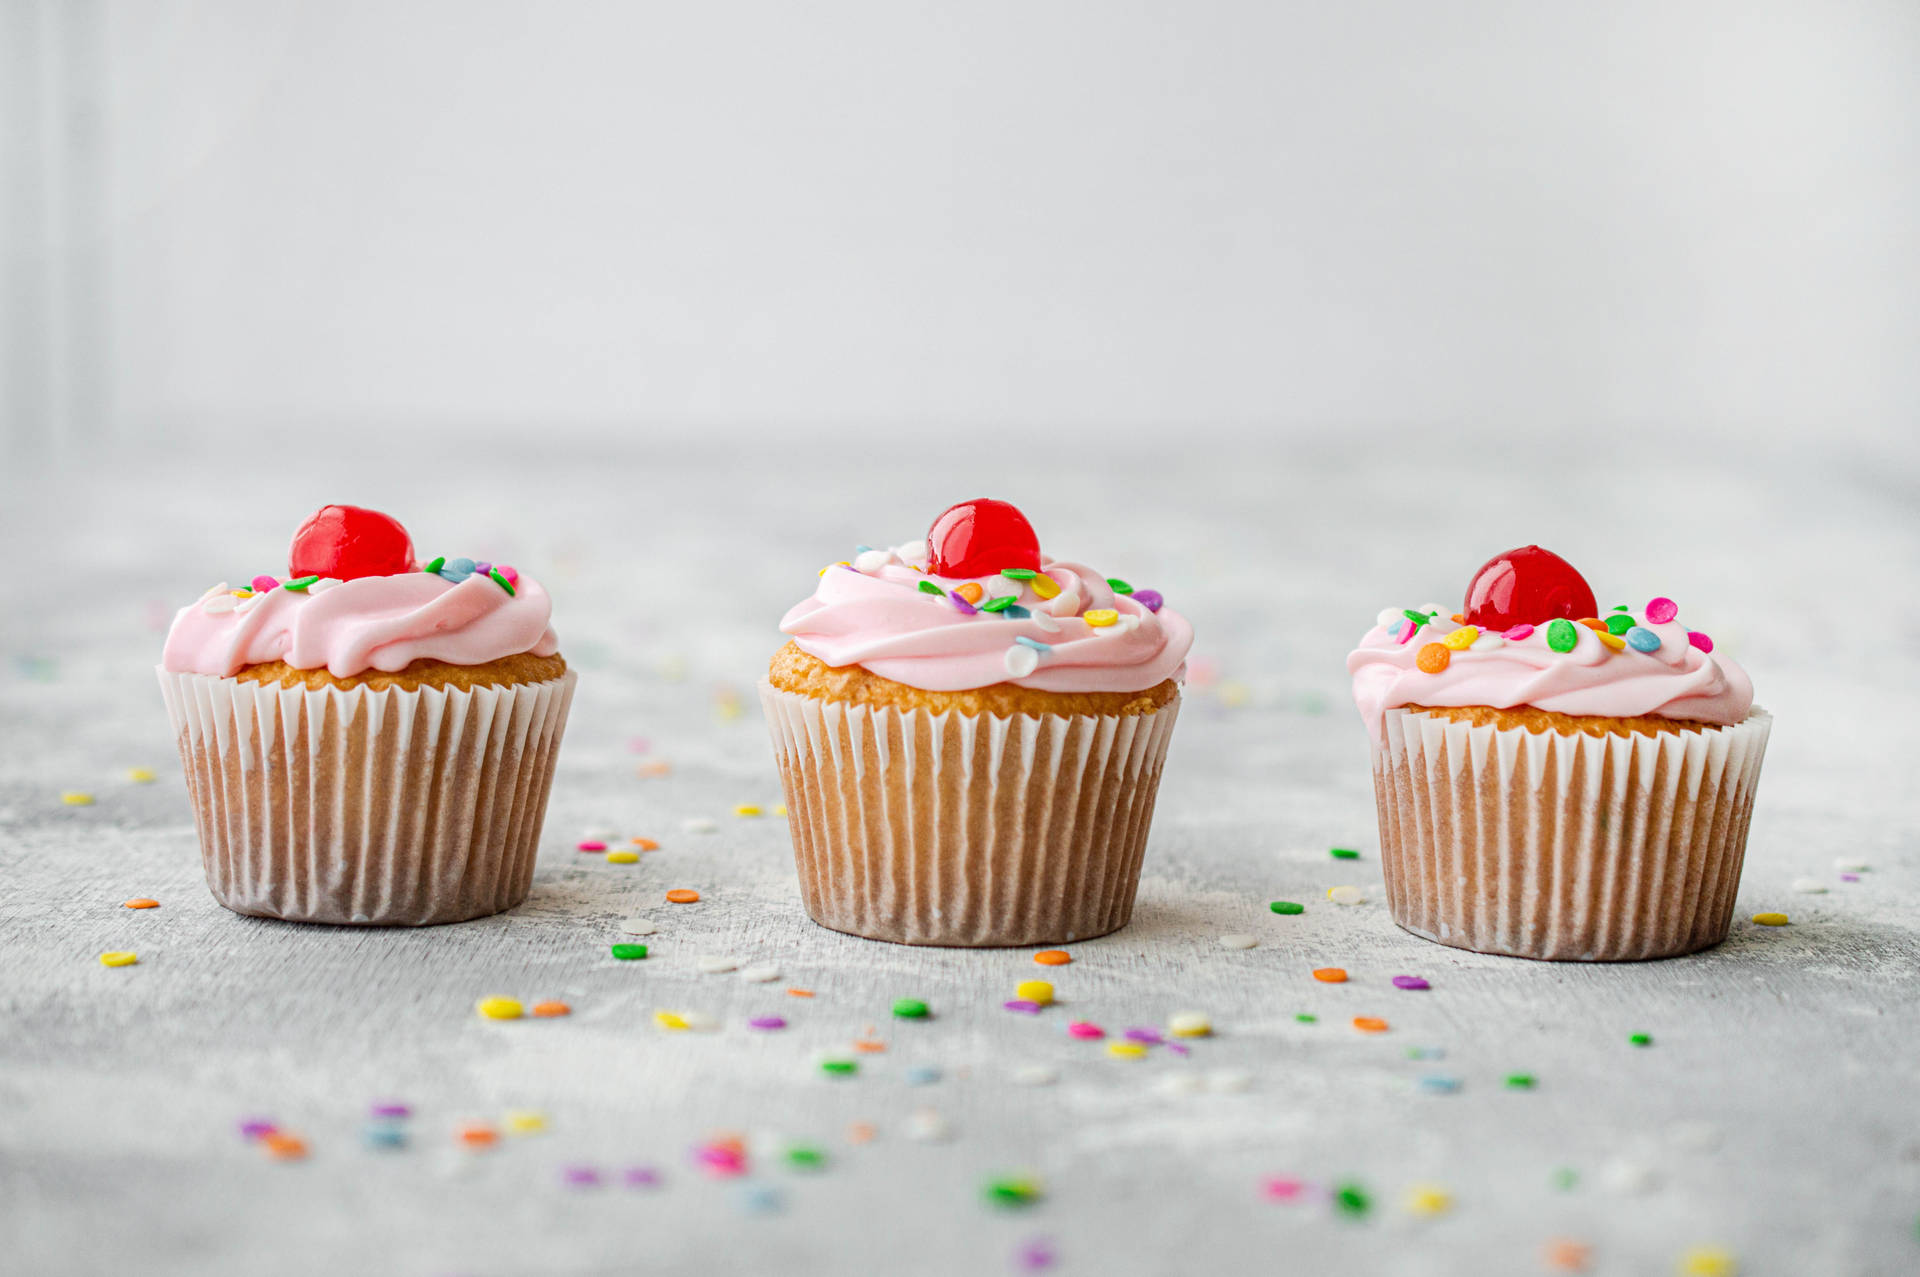 Cupcake 6016X4000 Wallpaper and Background Image